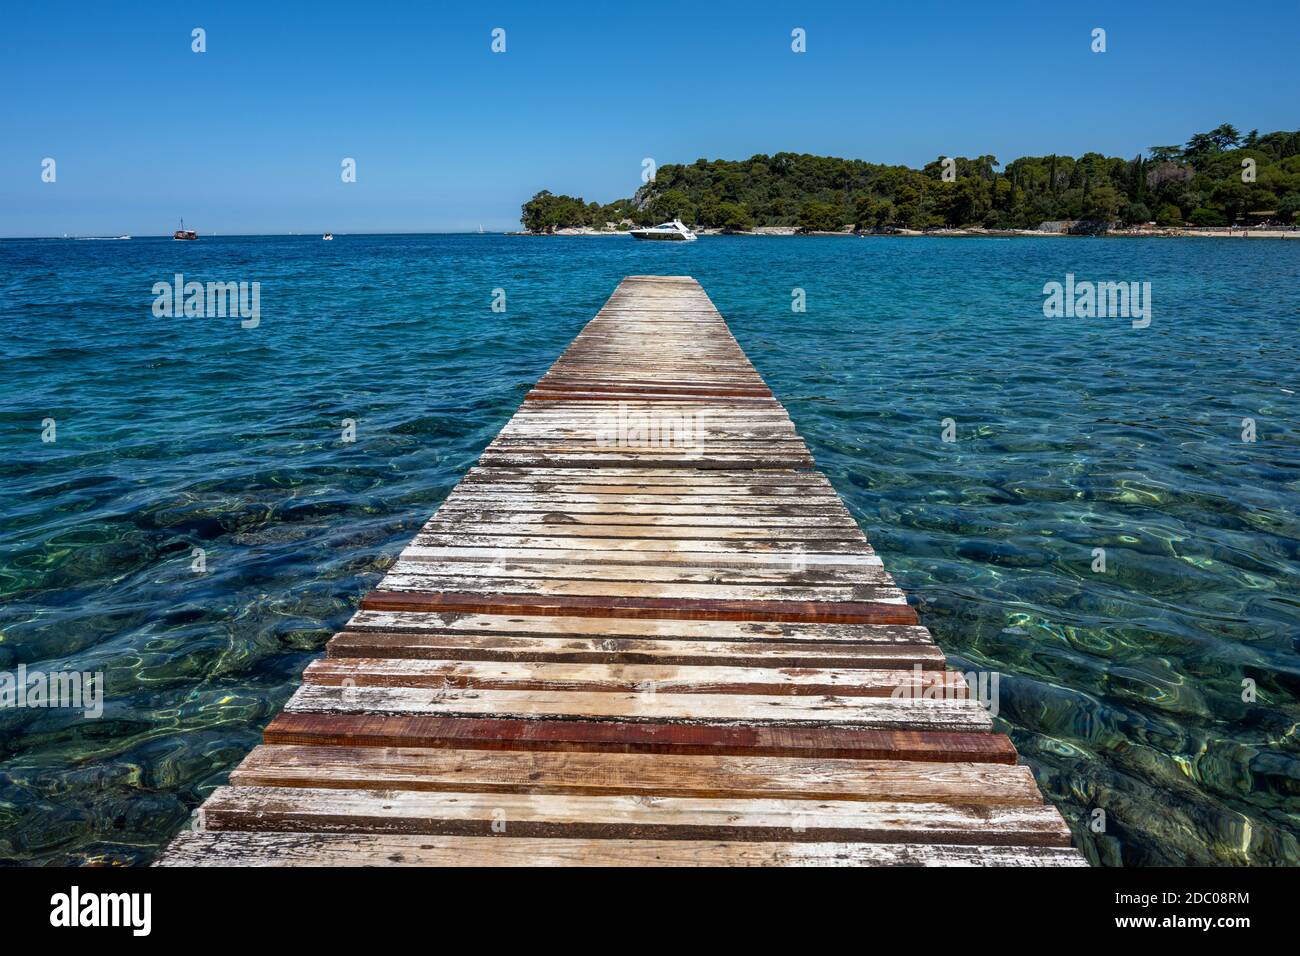 Old and worn jetty with turquoise waters seen near Rovinj, Croatia Stock Photo